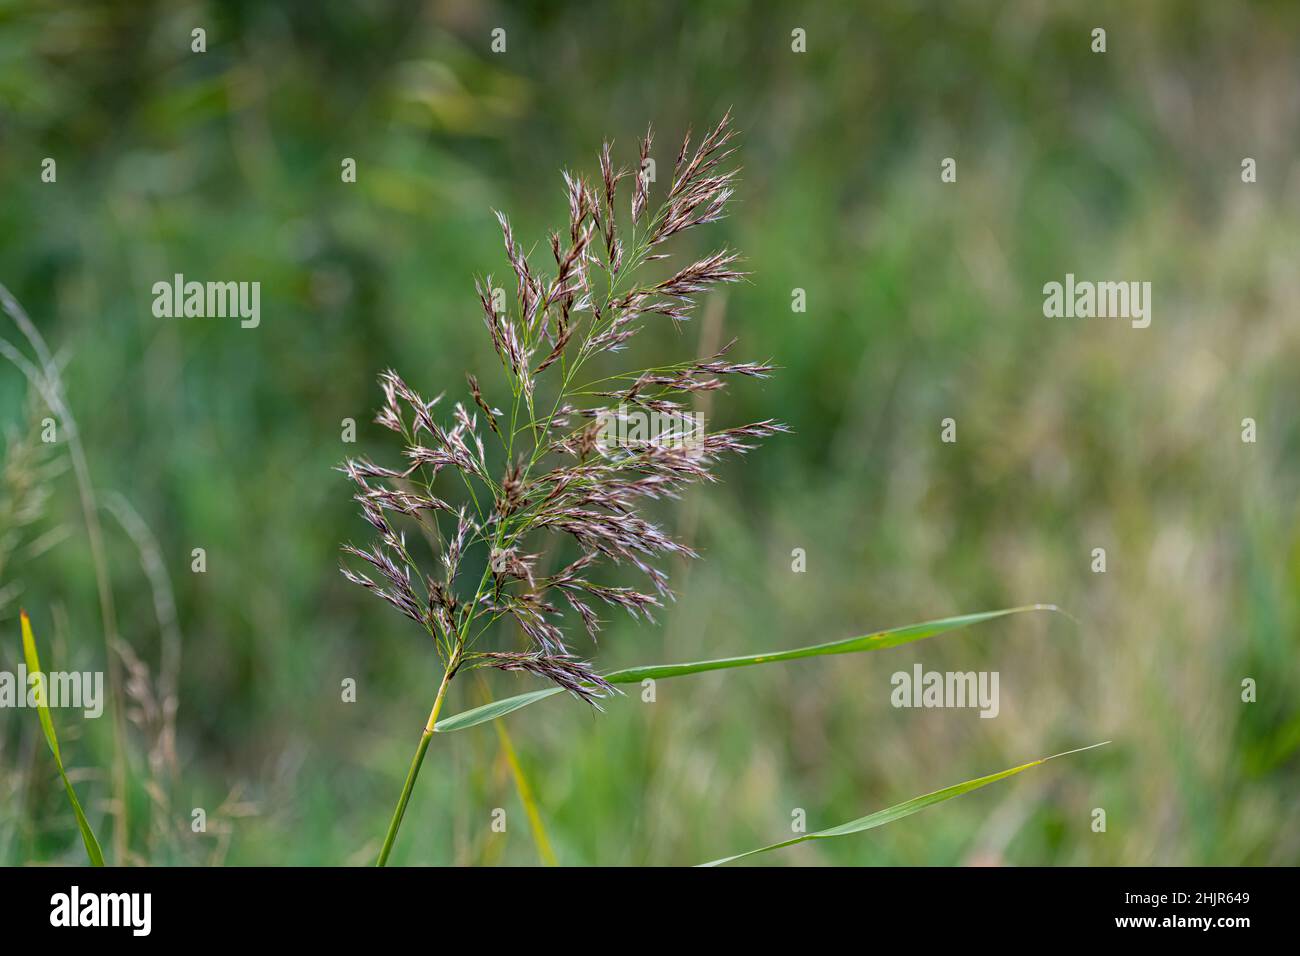 Grass seed head in autumn with soft, blurred, green background Stock Photo